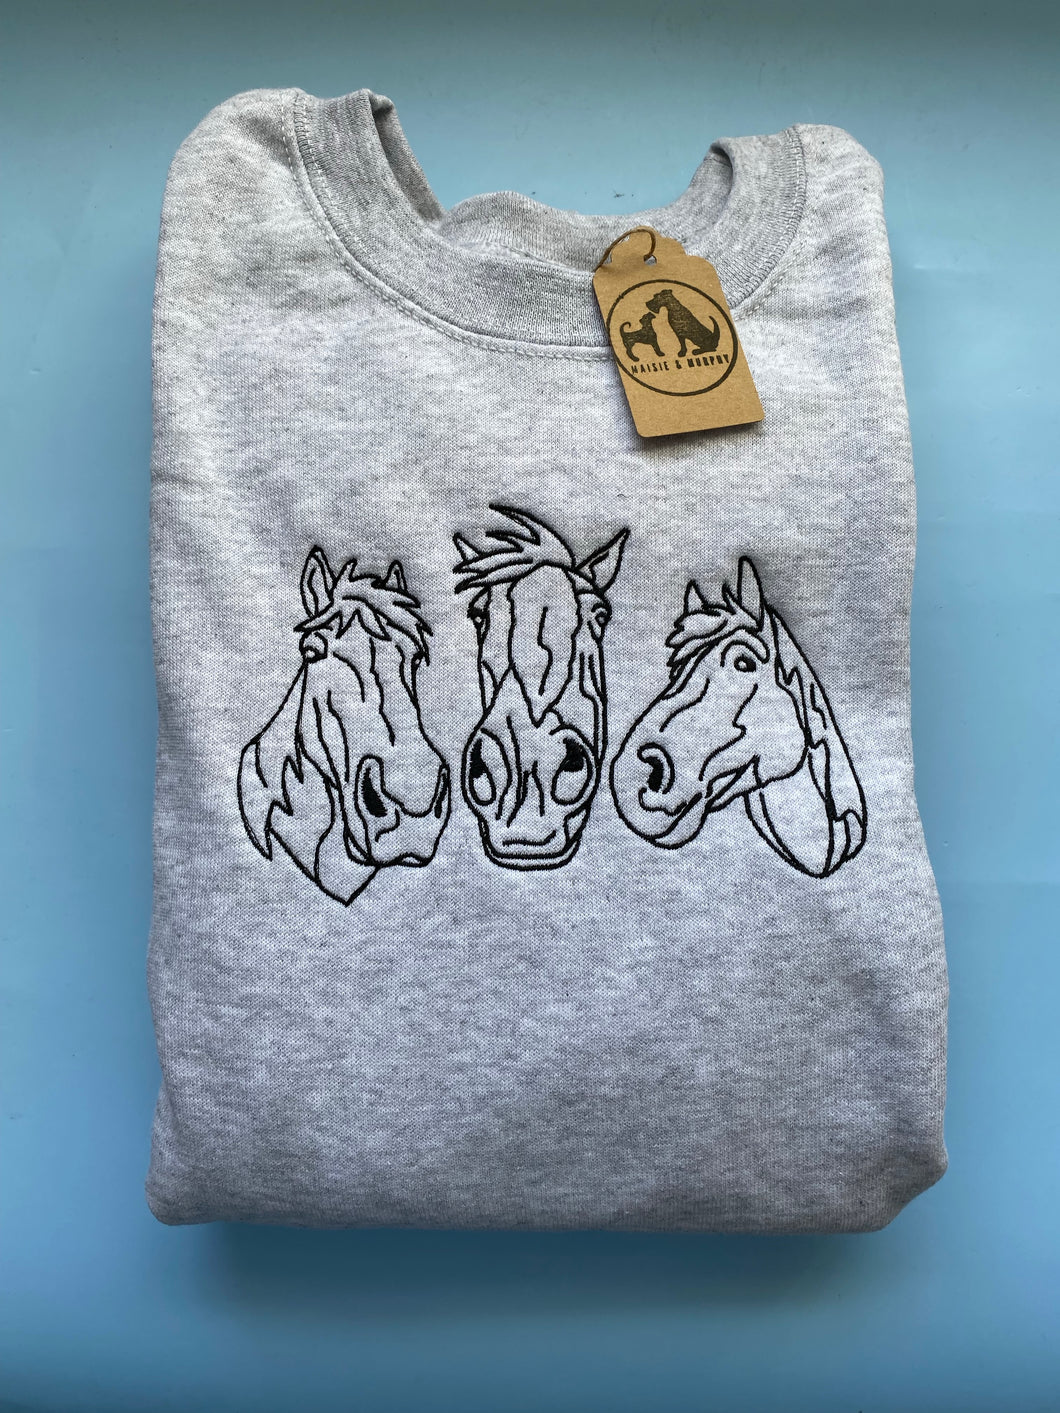 Embroidered Horse Sweatshirt - Gifts for horse lovers and riders